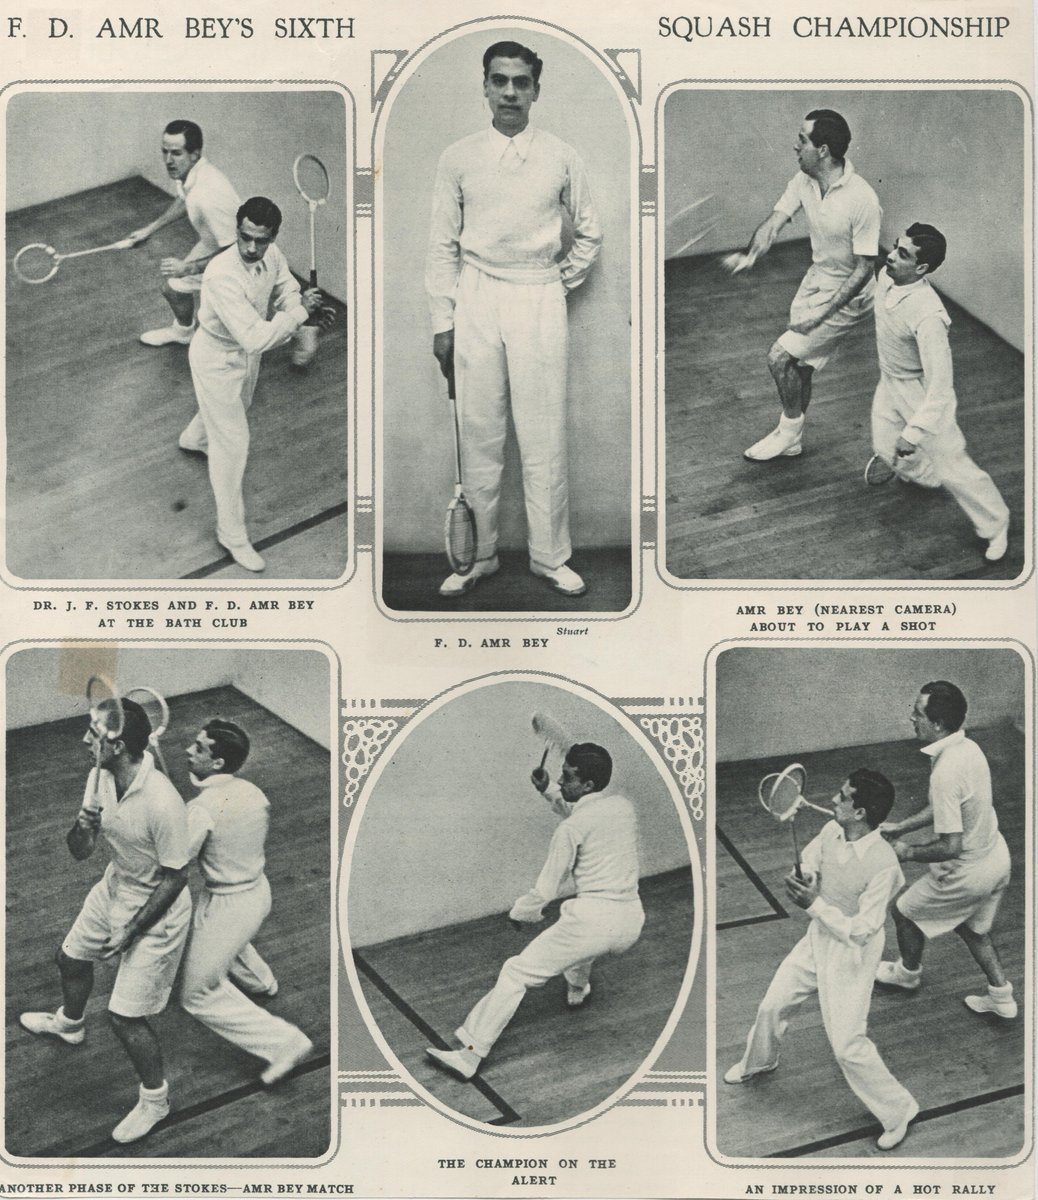 When Abdul Fattah Amr Bey won his sixth British Amateur title in 1937 (and the Egyptian won five British Open titles too), the UK ‘society’ magazine, the Tatler, produced this picture feature on him. @MasrSquash